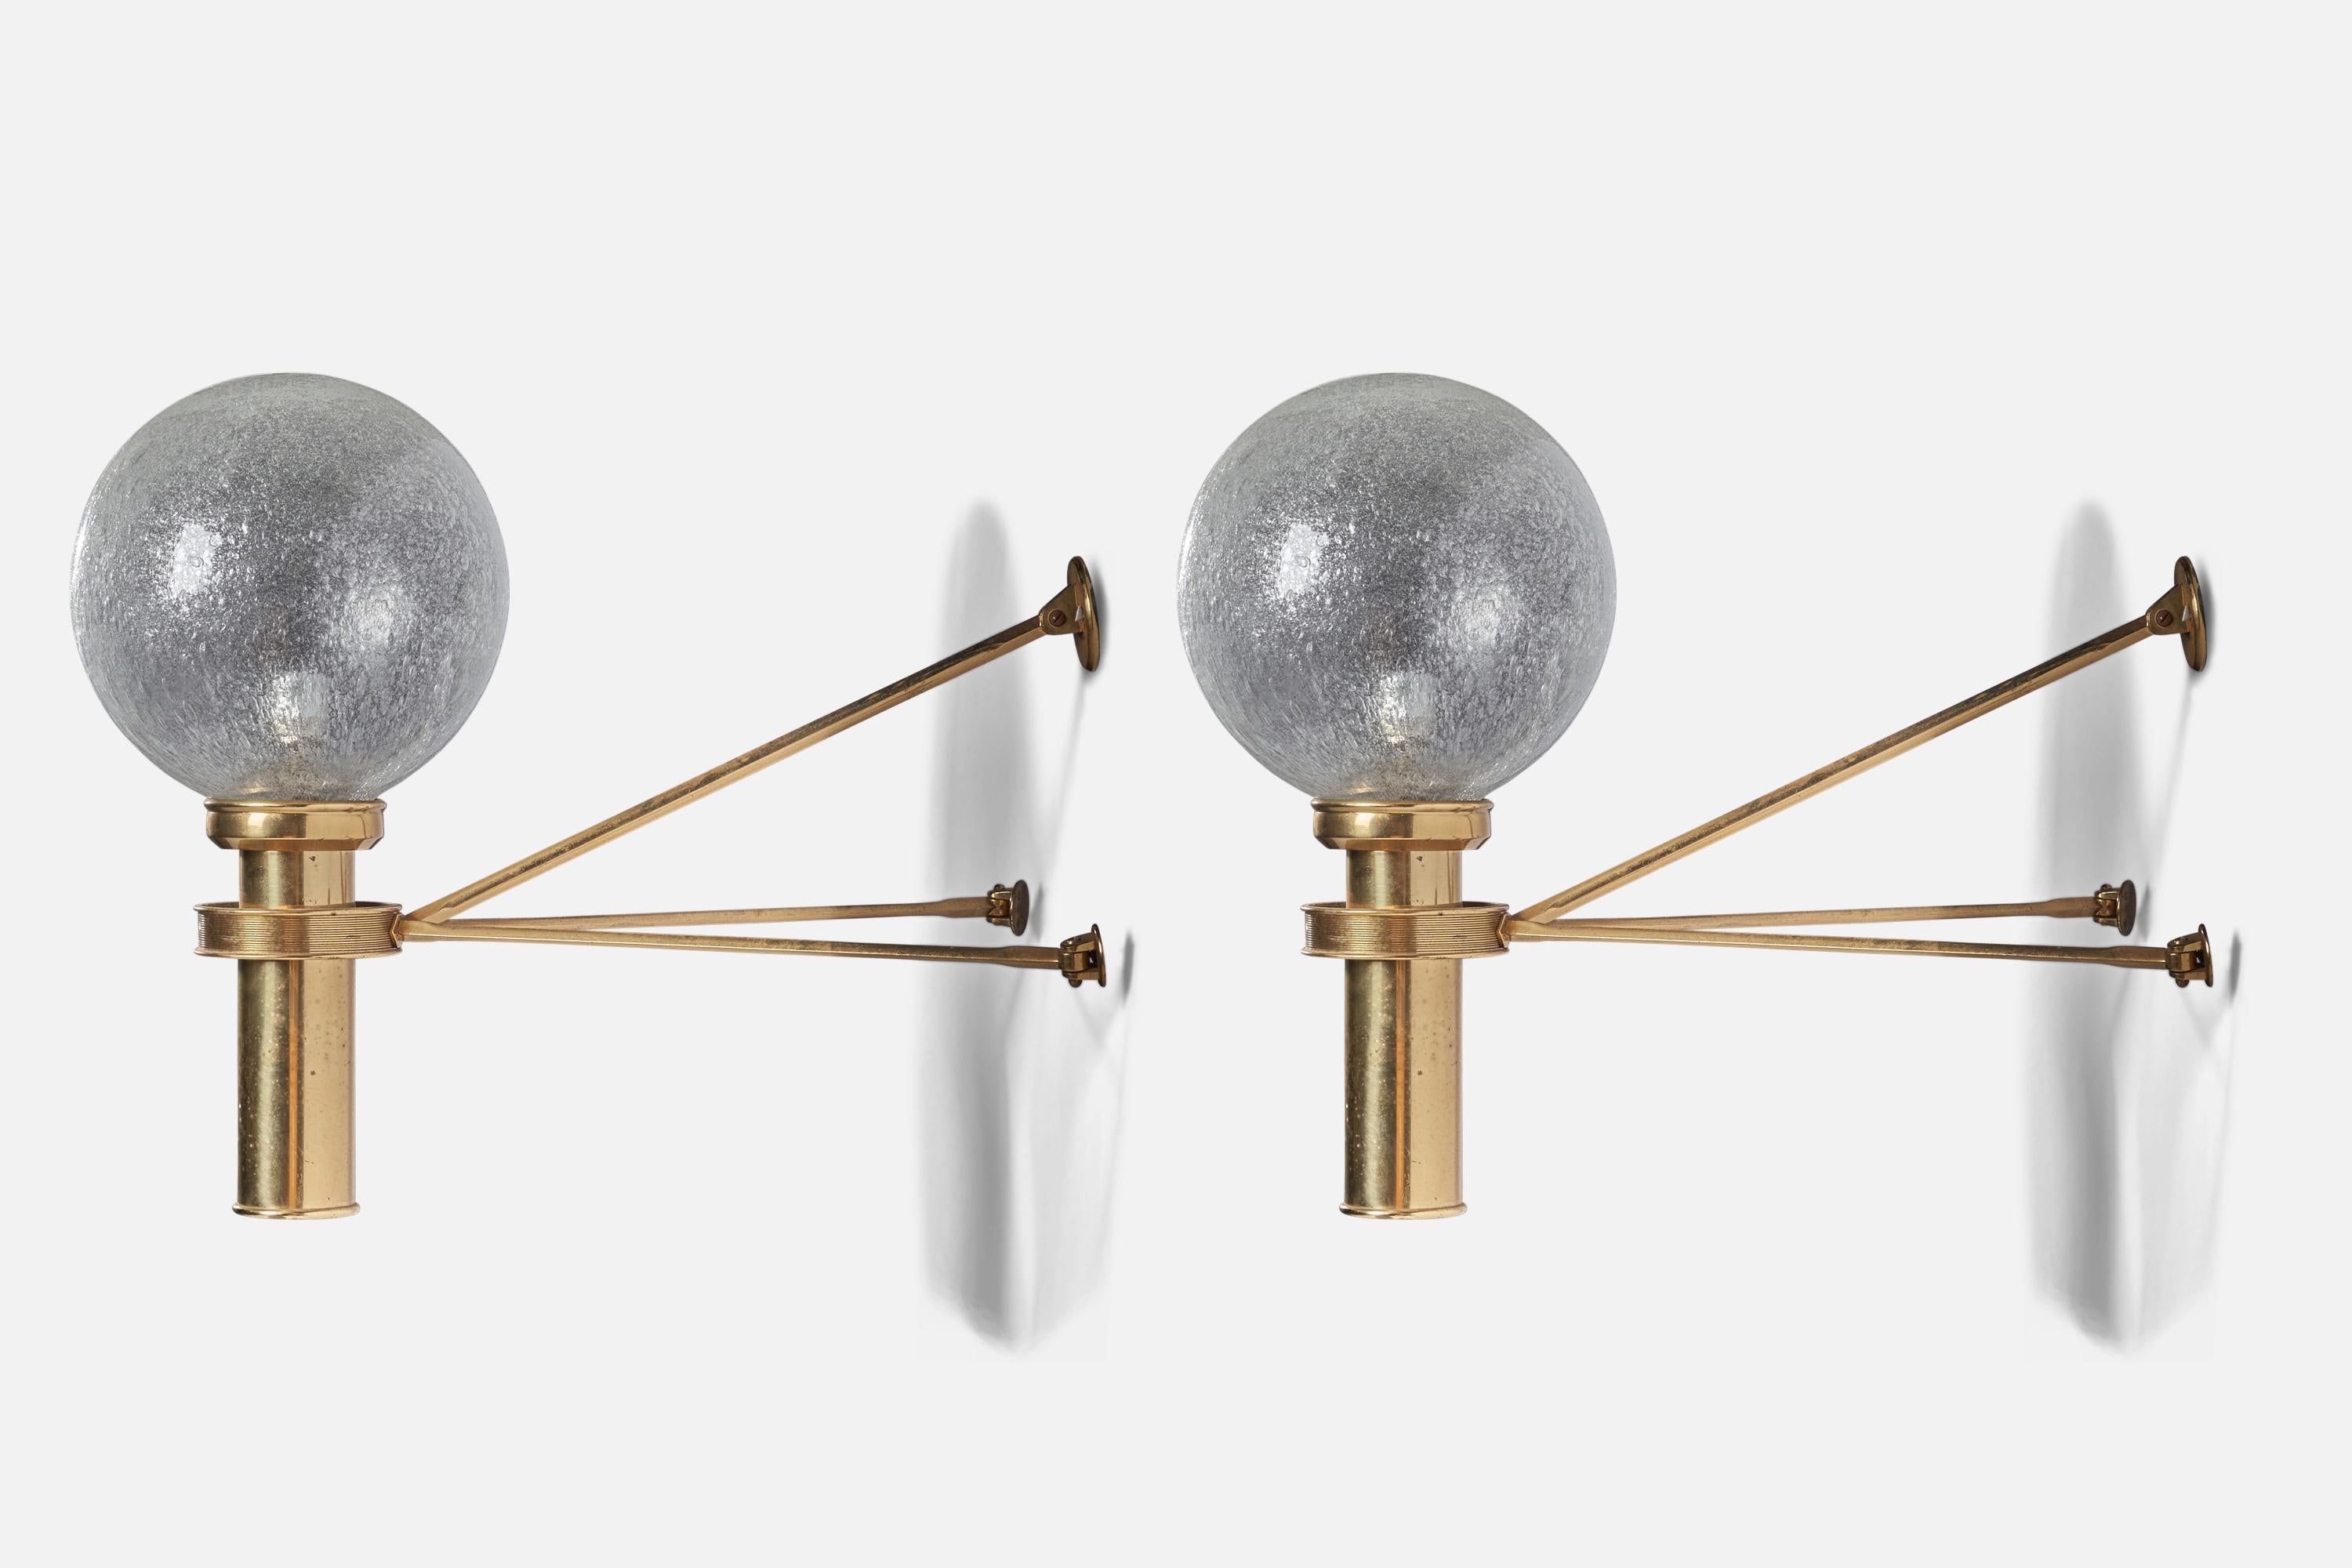 A pair of large brass and blown glass wall lights designed and produced in Austria, 1950s.

Overall Dimensions (inches): 20” H x 10” W x 24 D
Back Plate Dimensions (inches): 19” H x 15.5” W 
Bulb Specifications: E-26 Bulb
Number of Sockets: 1
All